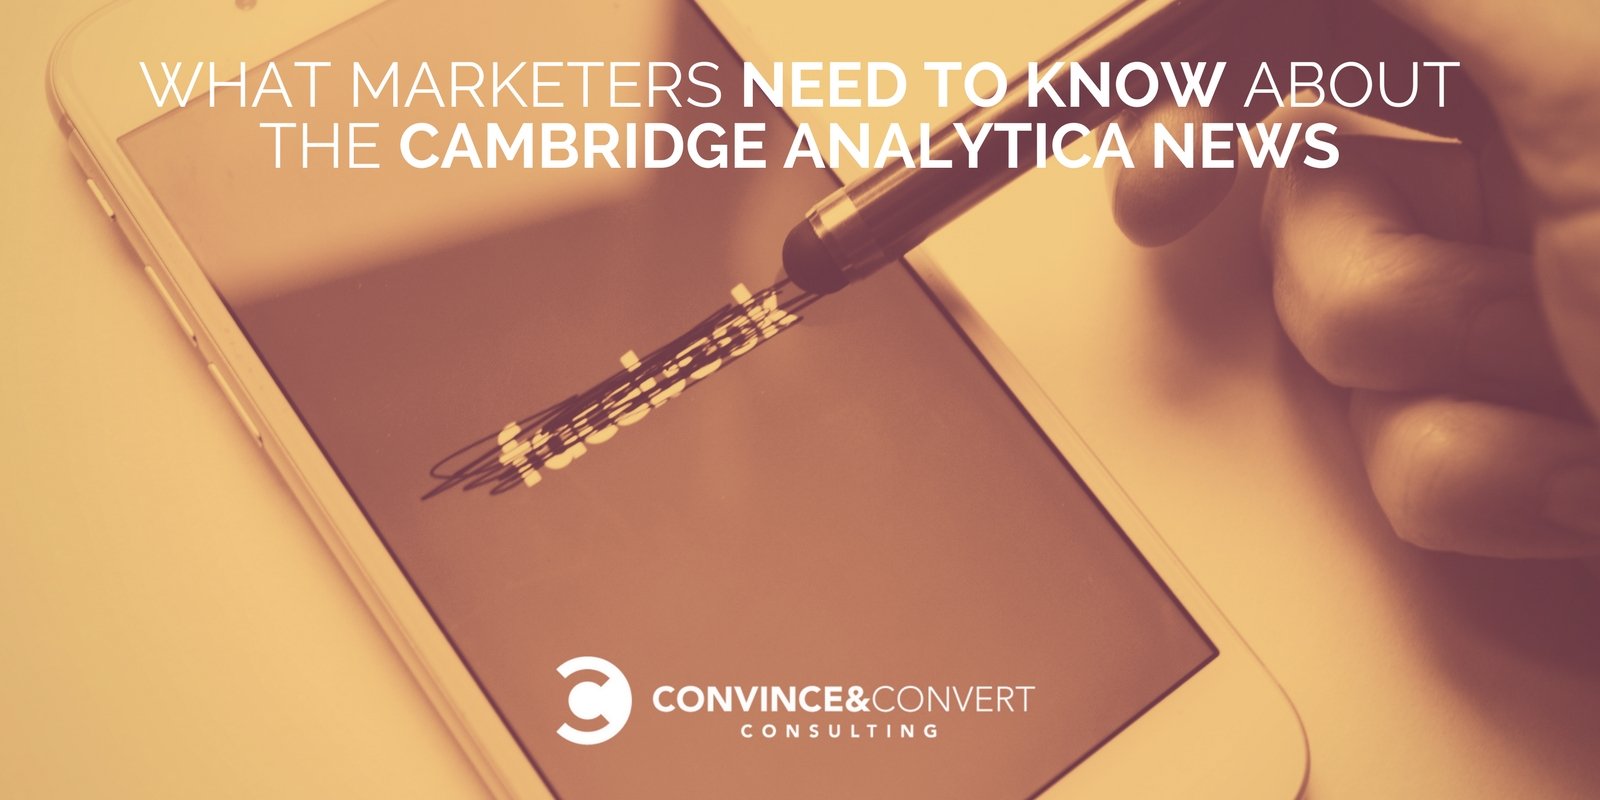 What Marketers Need to Know About the Cambridge Analytica News